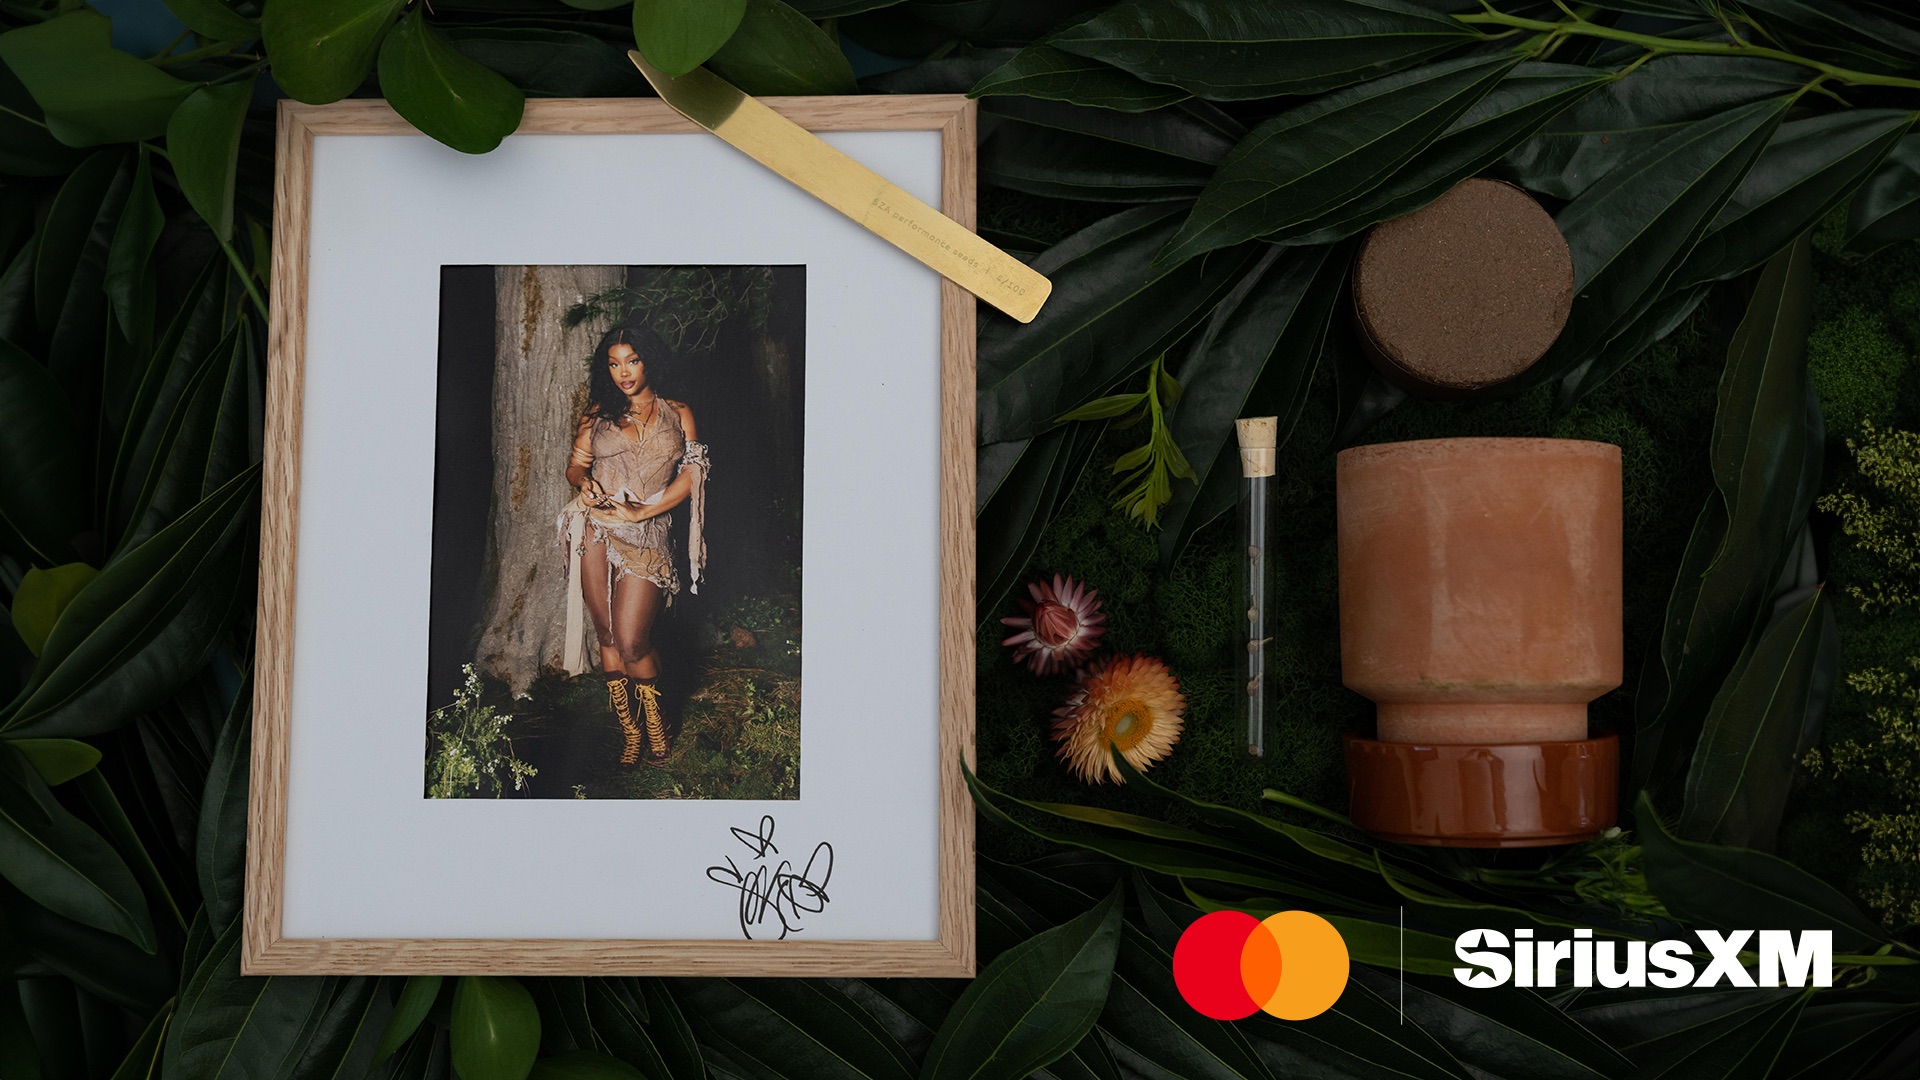 sza autographed photo from mastercard and siriusxm